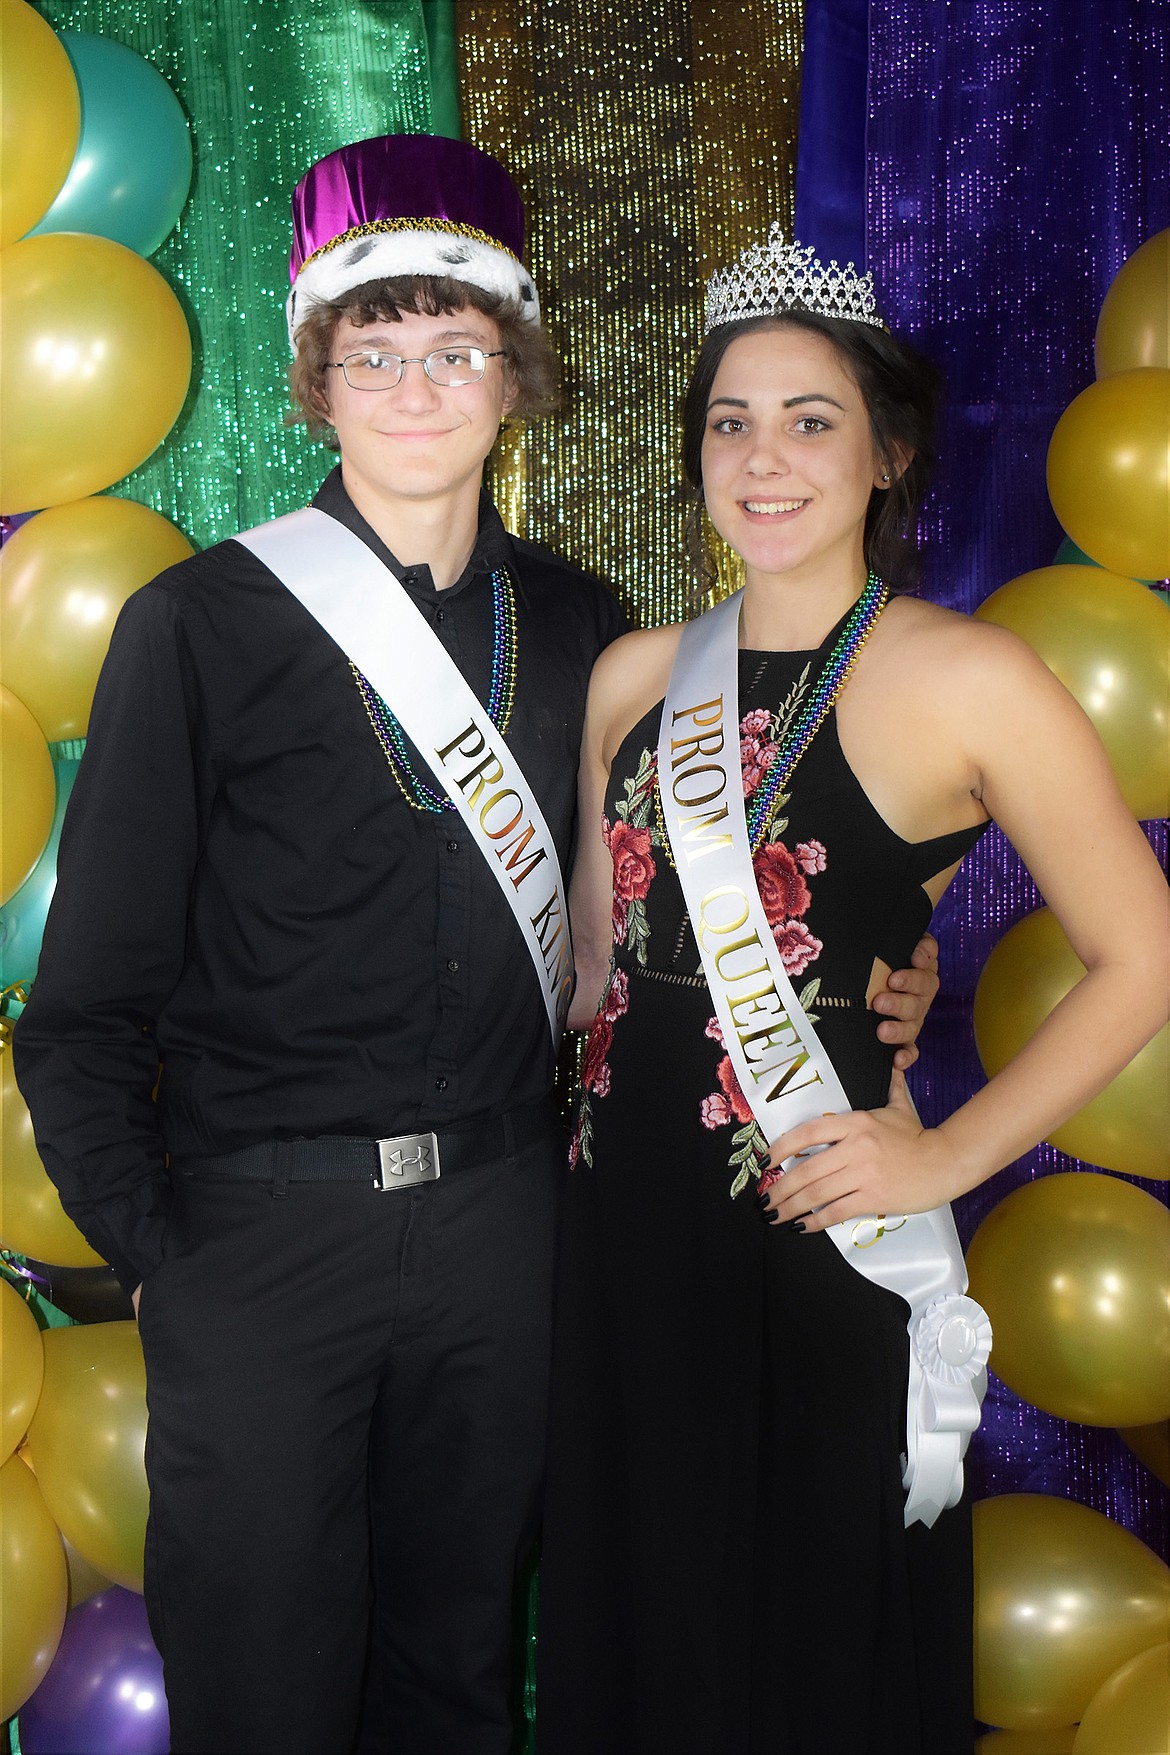 AJ Faur and Aurora Becquart, King and Queen of Troy Prom, pose on Saturday, March 17, 2018. (Photo by Svetlana Harper)